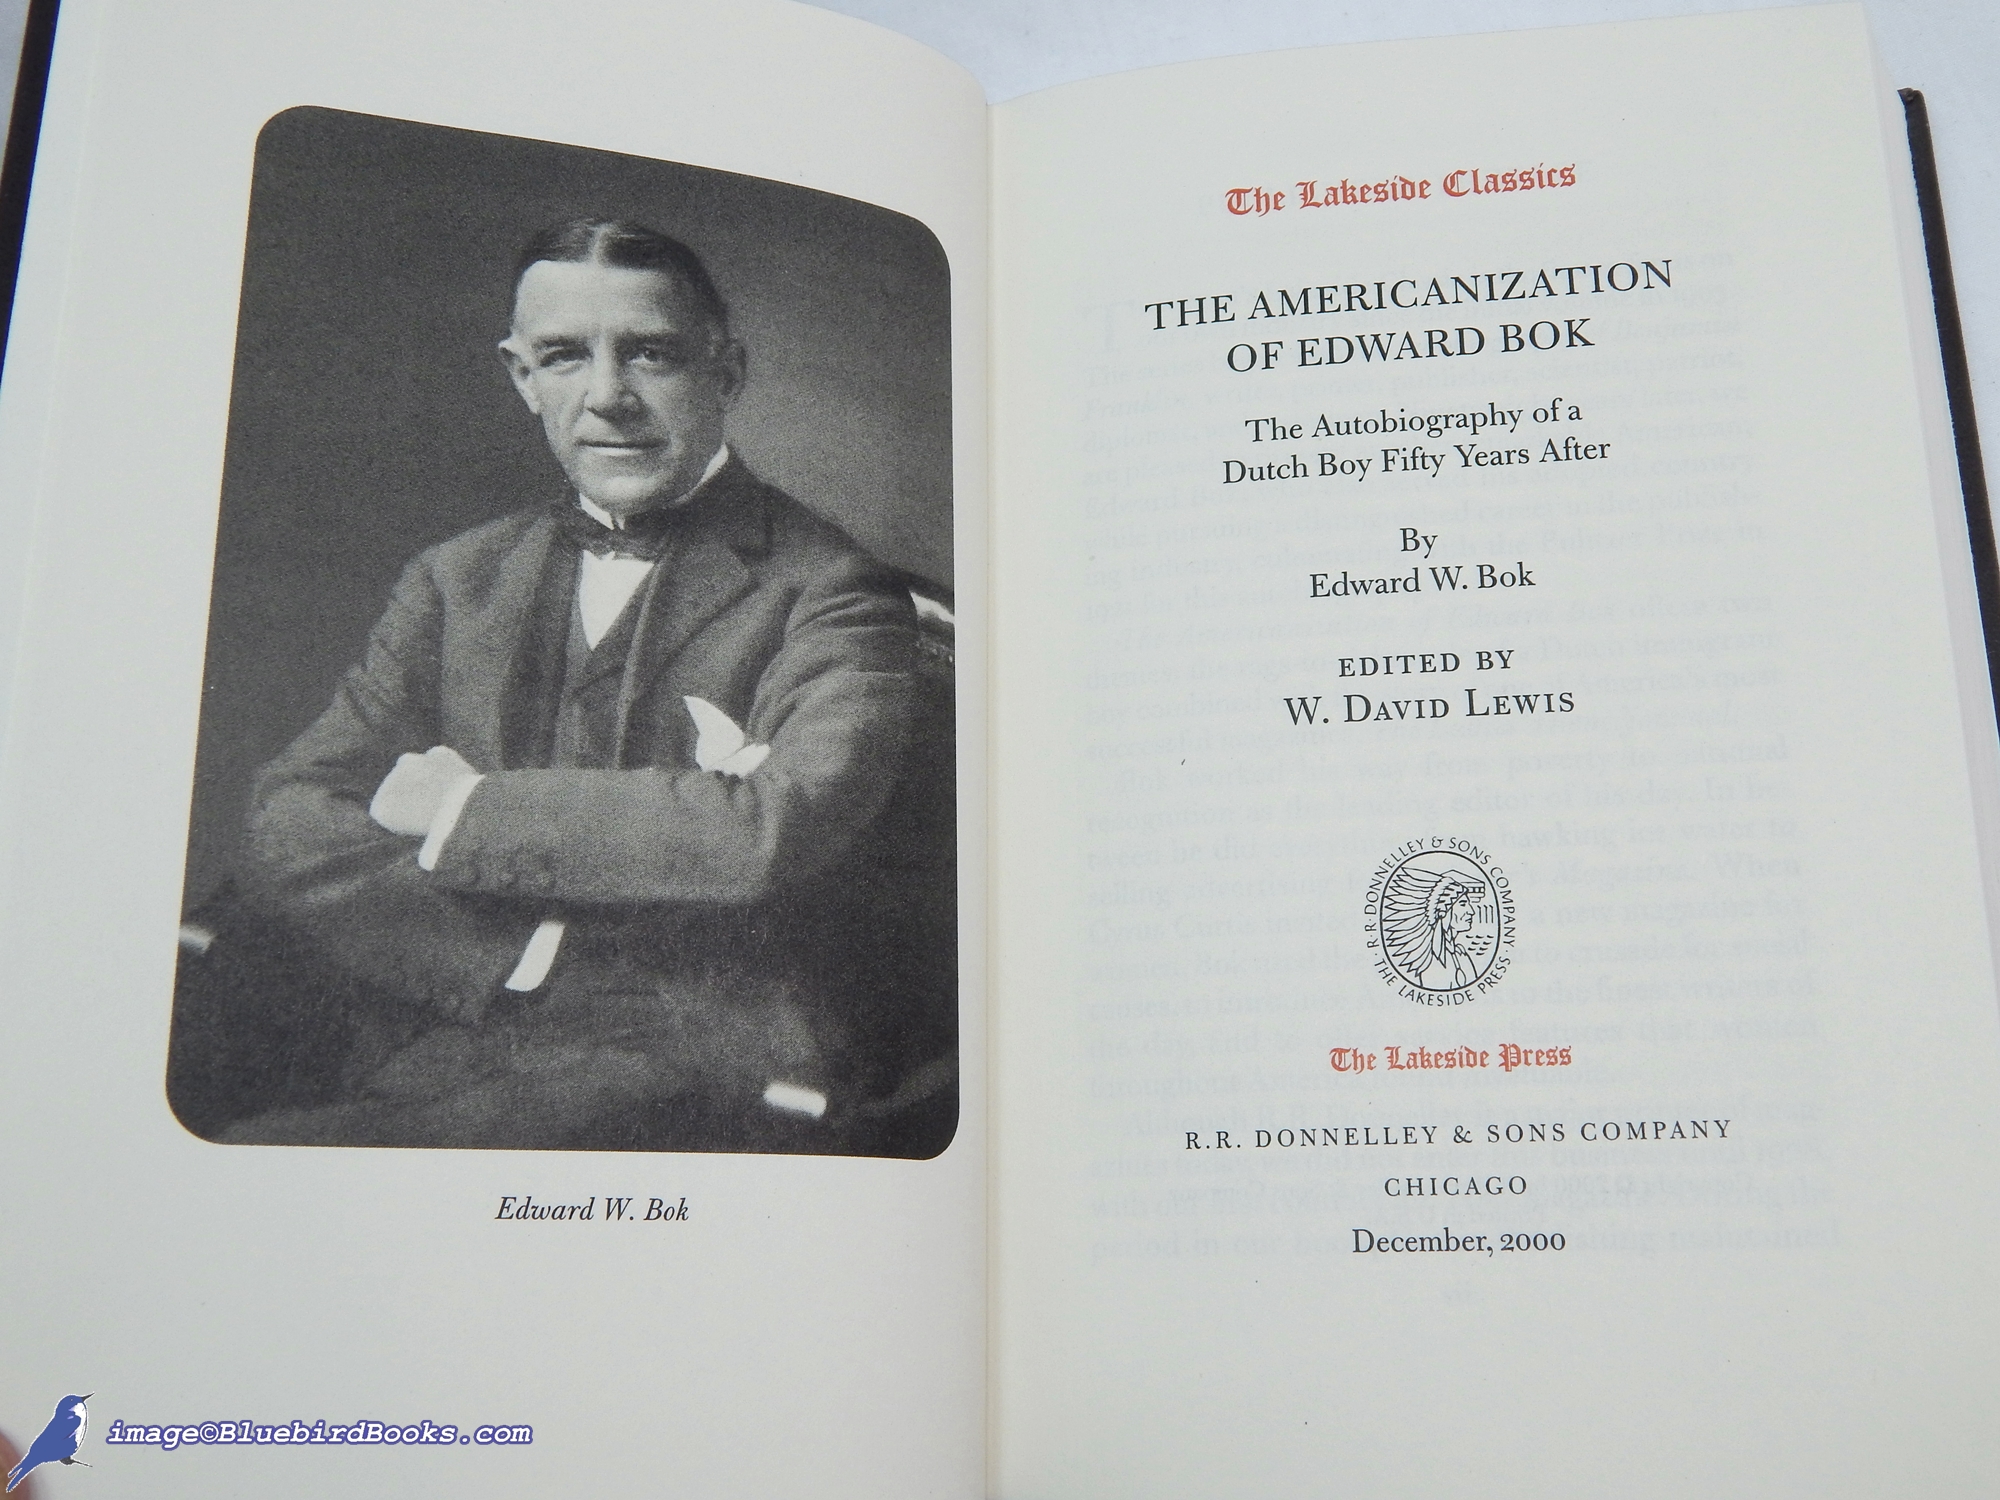 BOK, EDWARD W. (AUTHOR); LEWIS, W. DAVID (EDITOR) - The Americanization of Edward Bok: The Autobiography of a Dutch Boy Fifty Years After (Lakeside Classics No. 98)